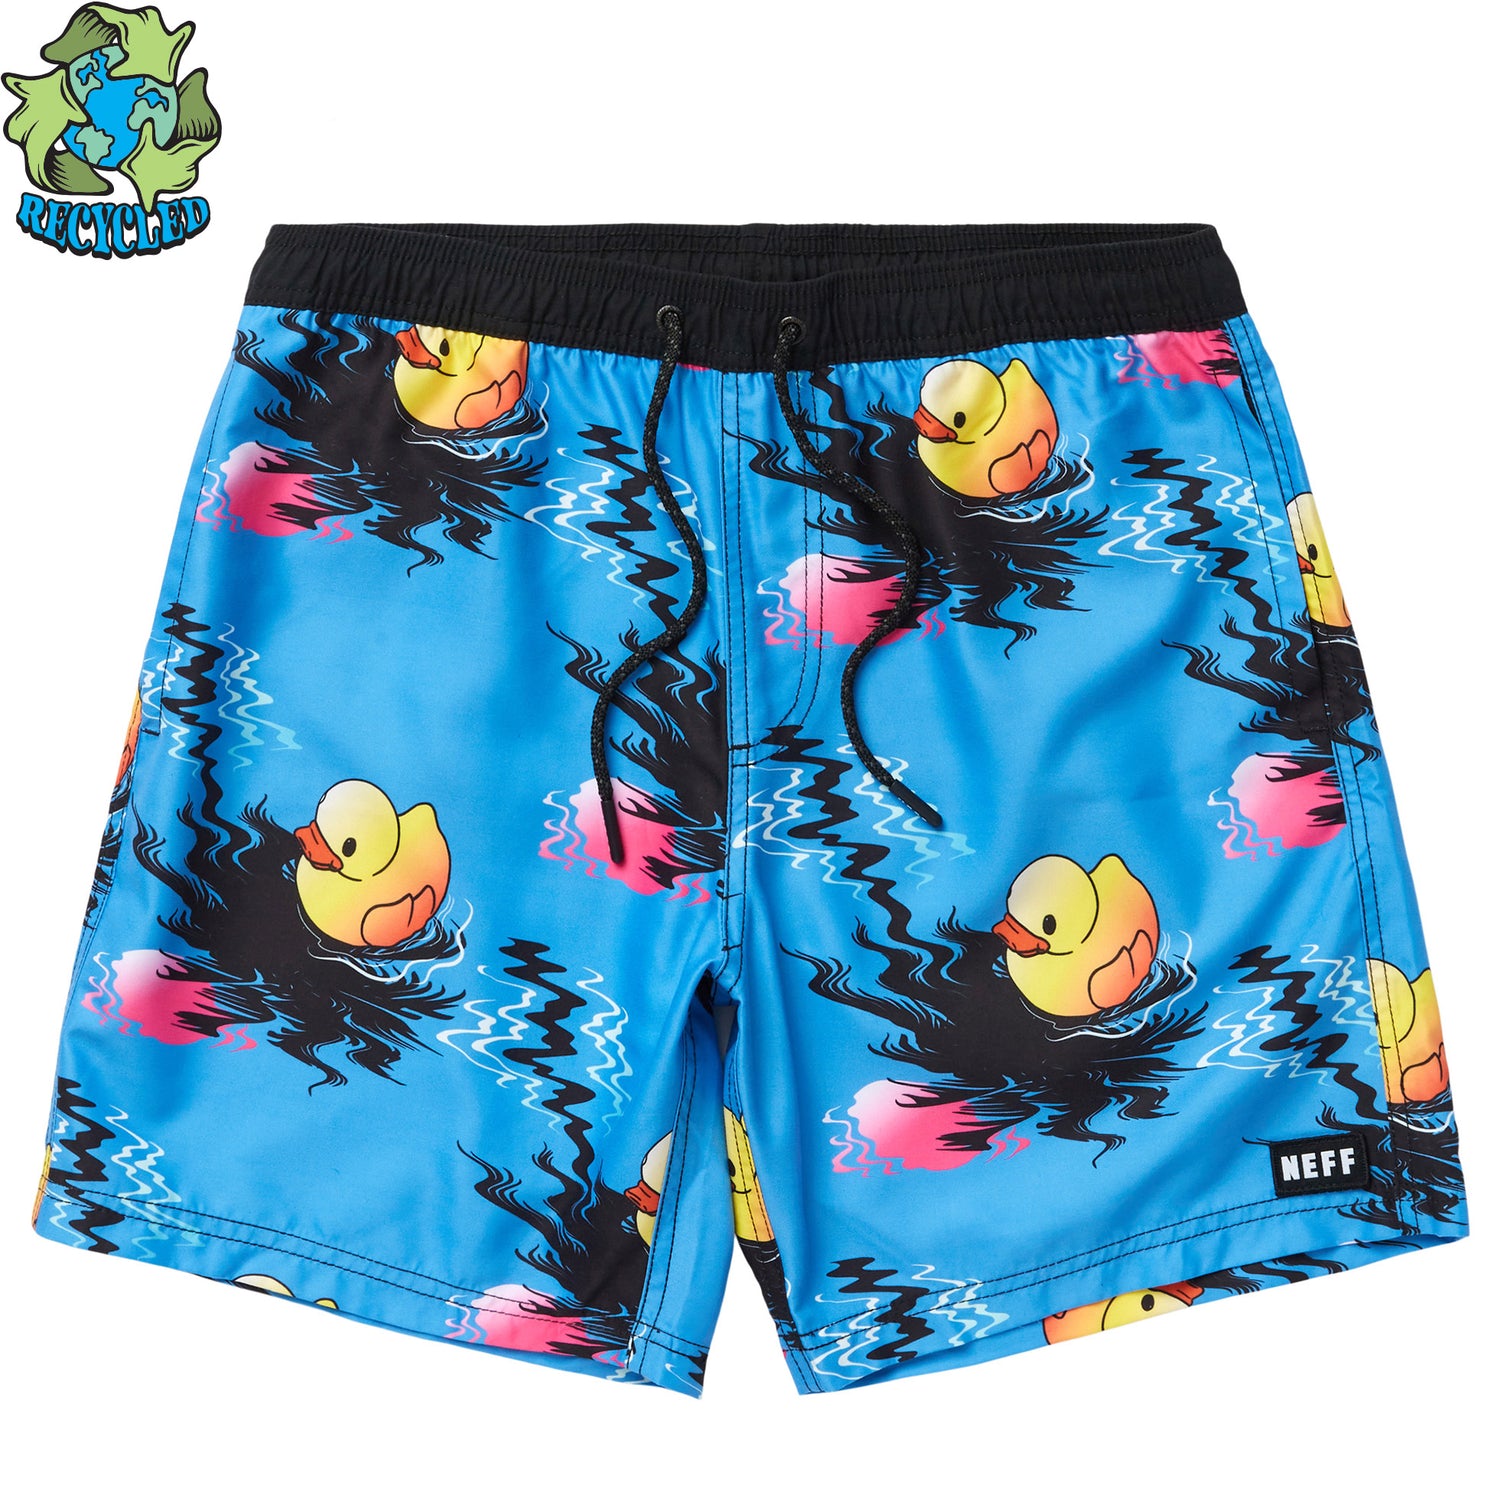 FLOAT ON 17" HOT TUB VOLLEY SHORTS - BLUE